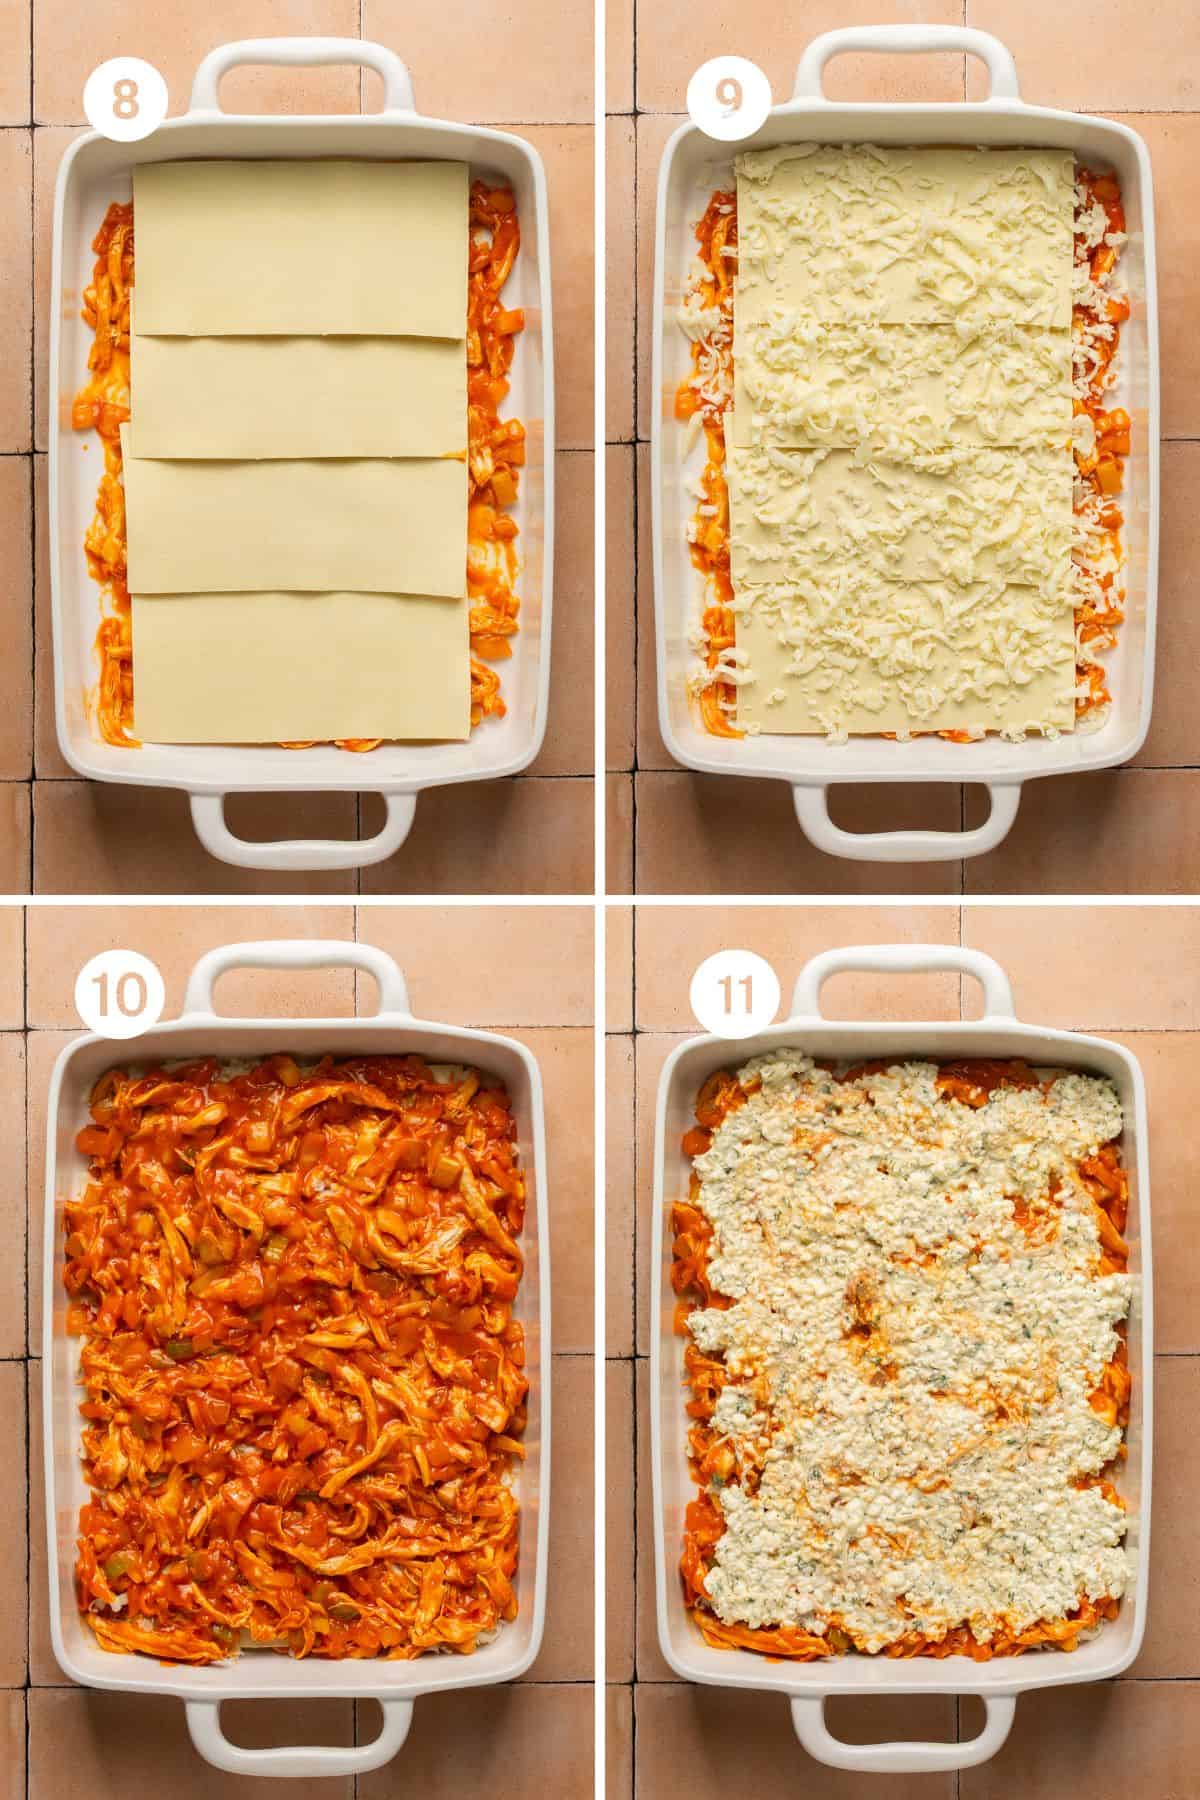 Four images showing laying the lasagna with noodles, cheese, chicken mixture and cottage cheese filling.